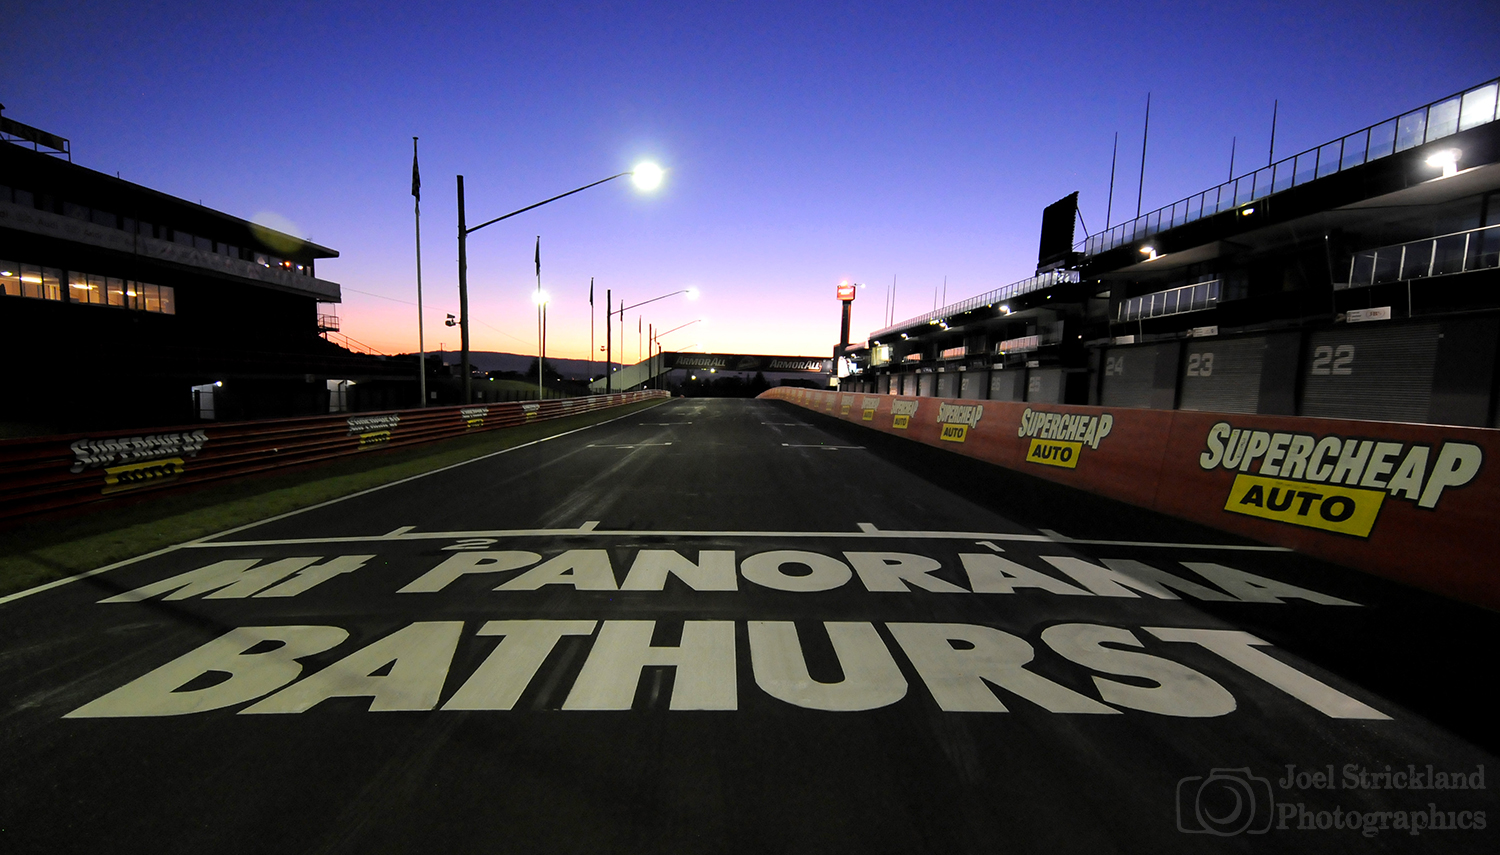 Race Day is here for the Bathurst 12 hour race.